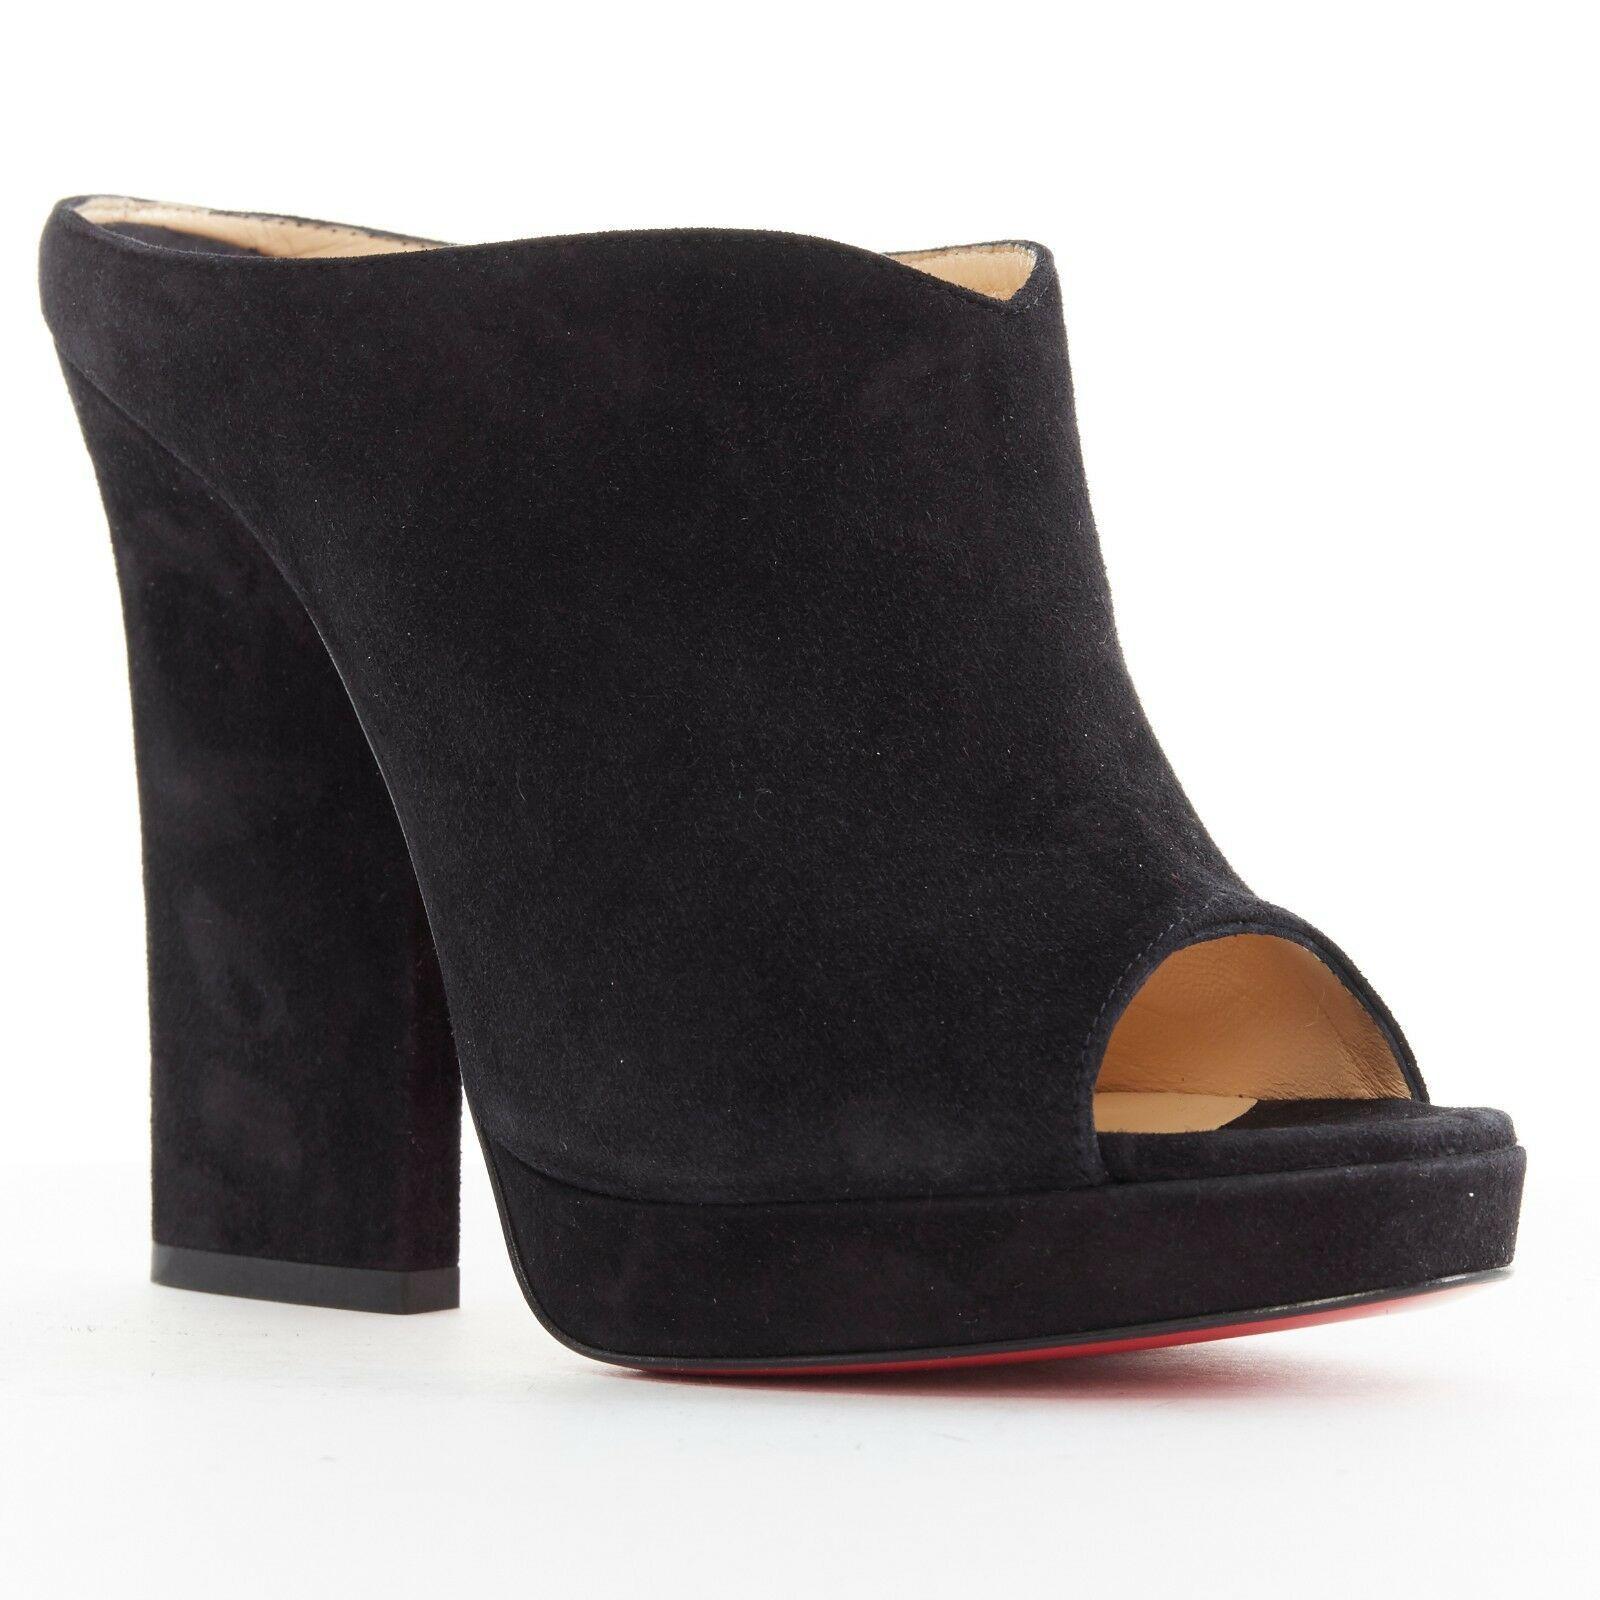 new CHRISTIAN LOUBOUTIN Roche Mule 120 black suede open toe chunky heels EU37
CHRISTIAN LOUBOUTIN
Roche Mule 120. 
Black suede leather upper. 
Open toe. 
Chunky heel. 
Slip on mule. 
Signature red lacquered leather sole. 
Padded insole. 
Tan leather